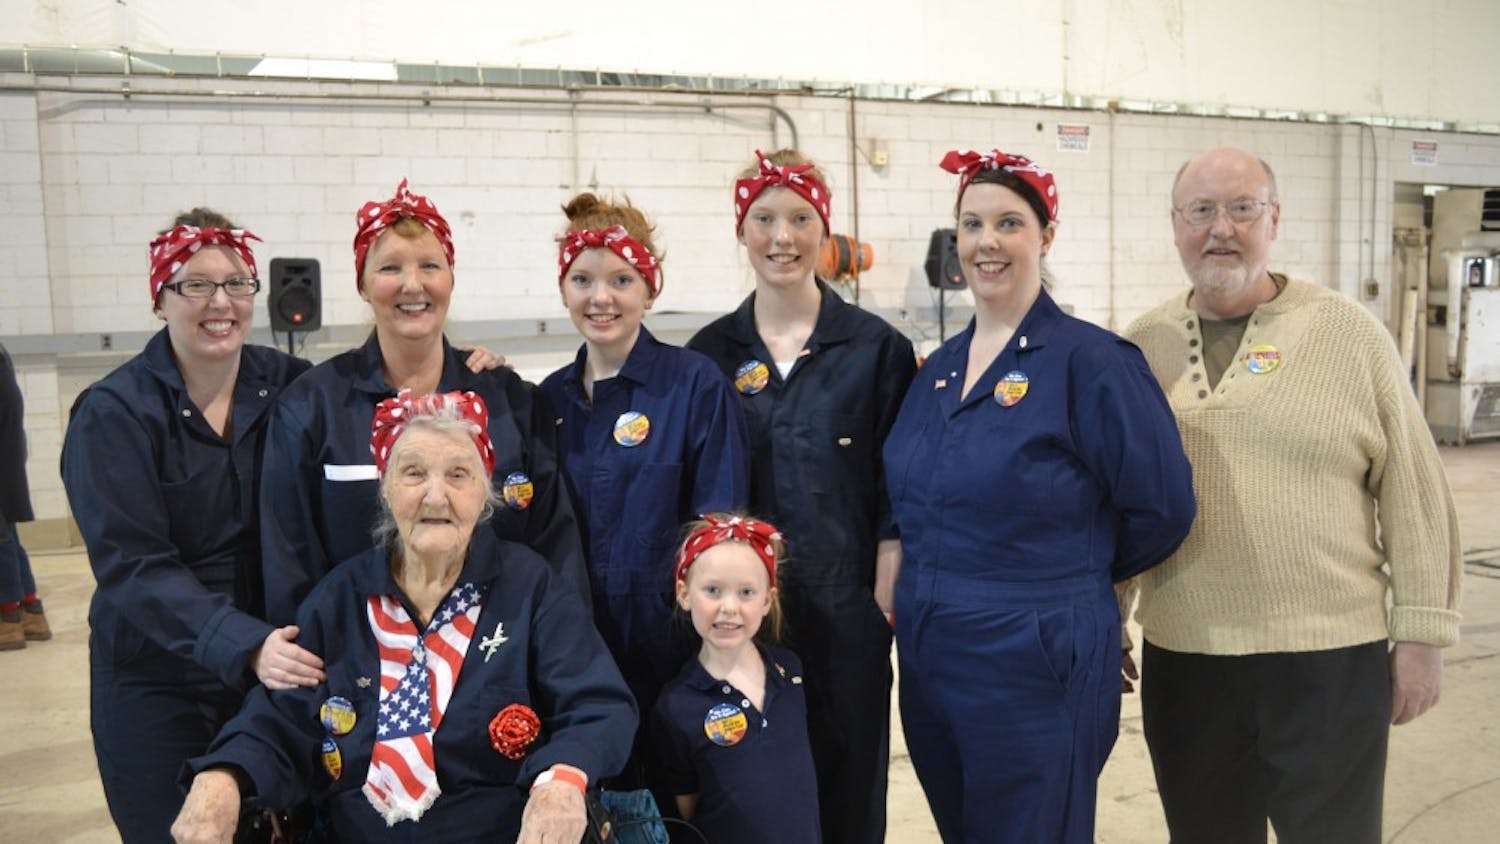 	Rosie Ruth Webb with her son Robert (far right), daughters, granddaughters, and great-granddaughter